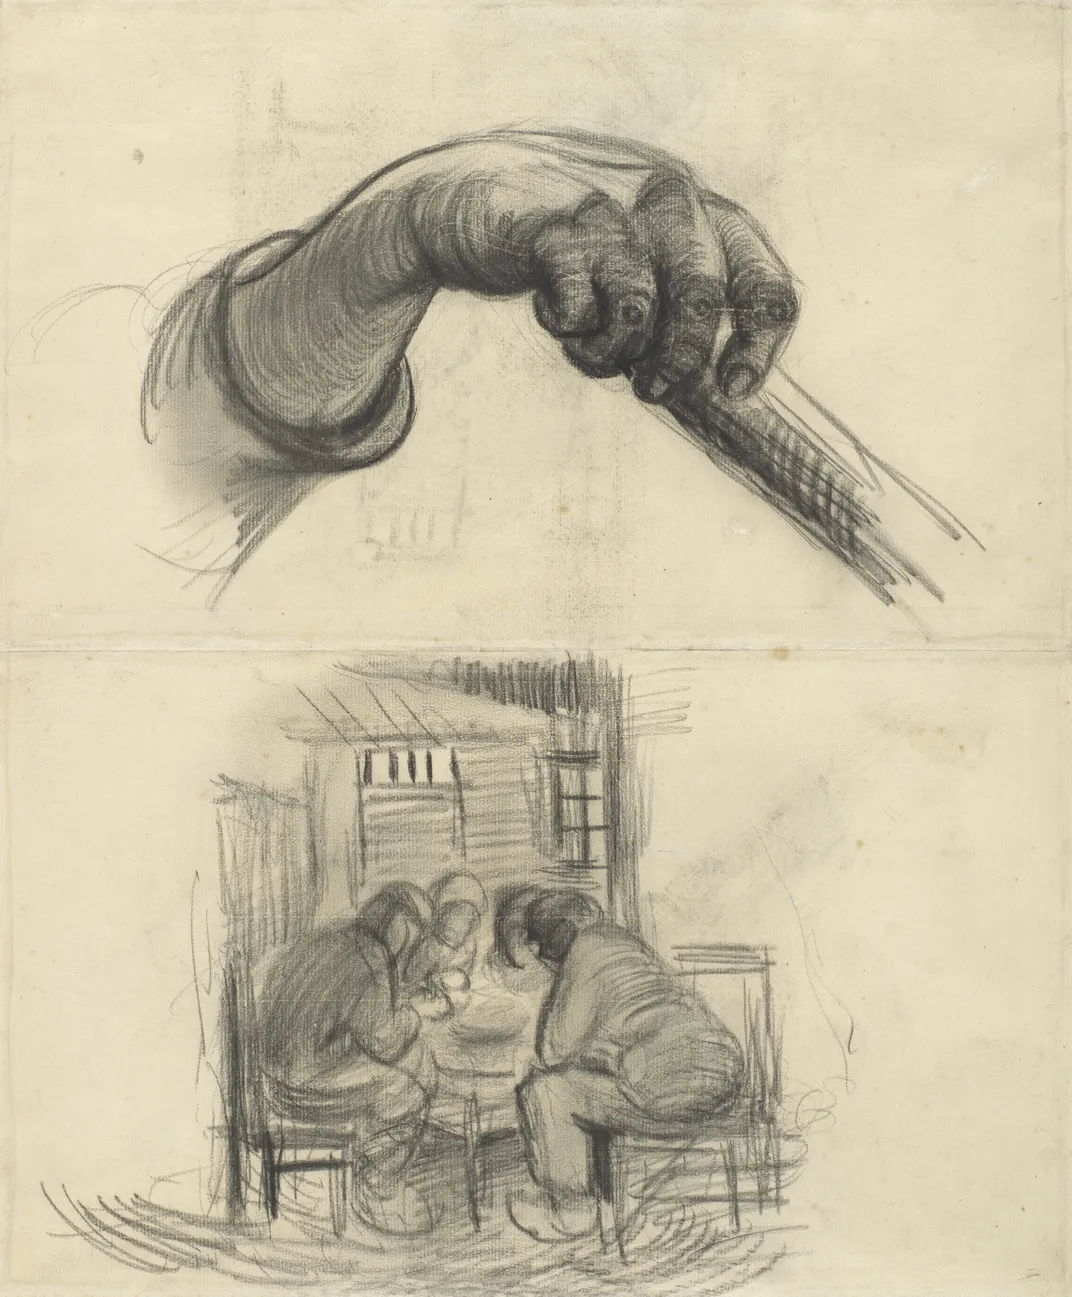 Vincent van Gogh, Hand With a Stick, and Four People Sharing a Meal, March–April 1885, chalk on paper